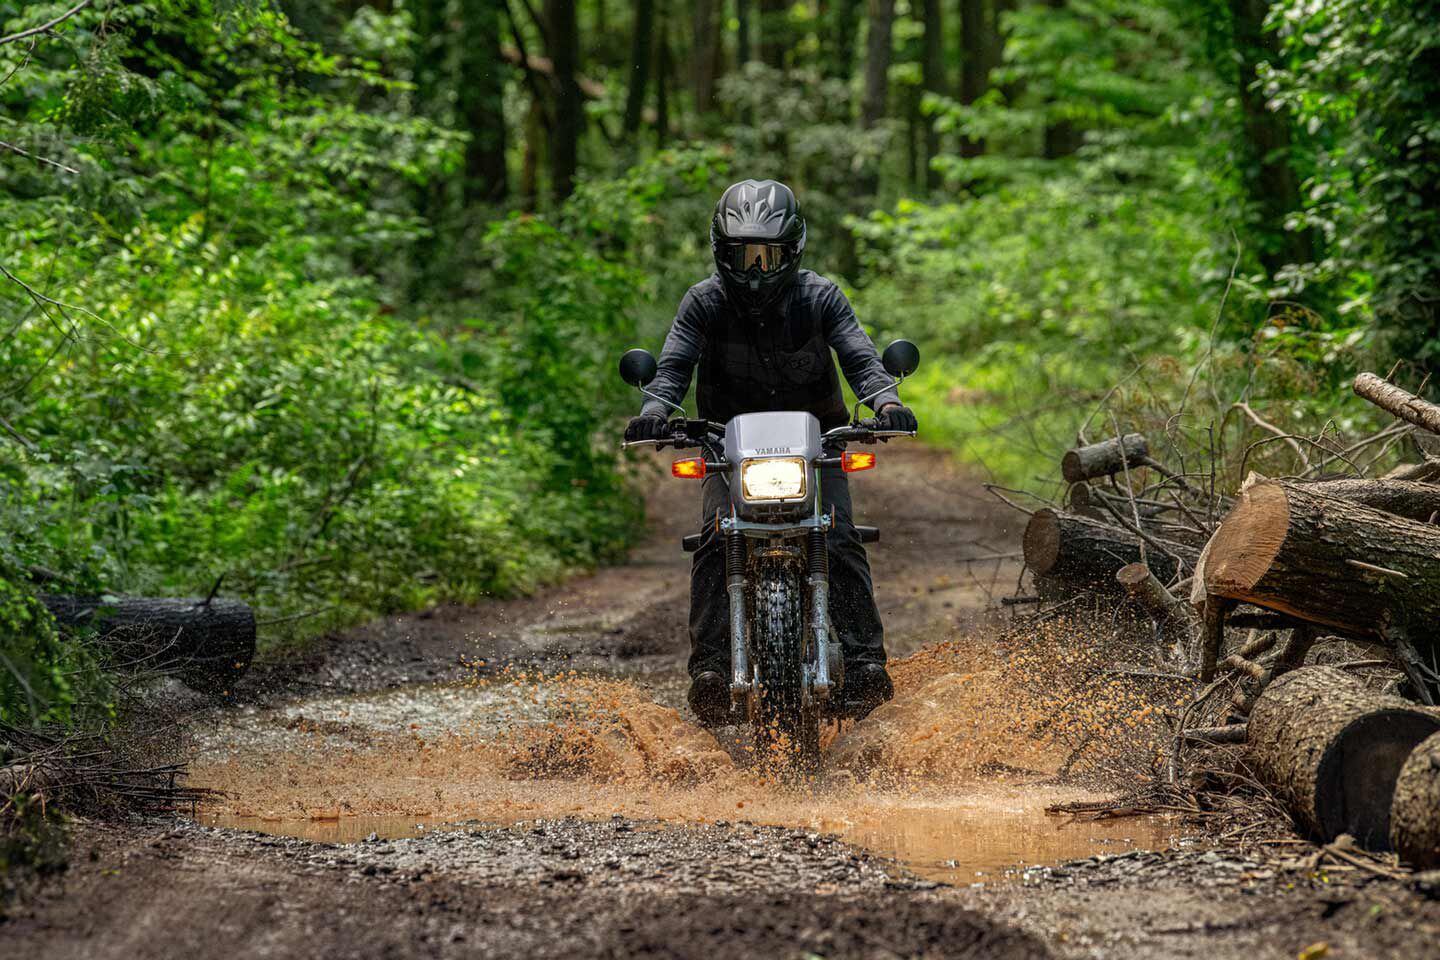 The TW200 is great for beginners and offers both on- and off-road capability.